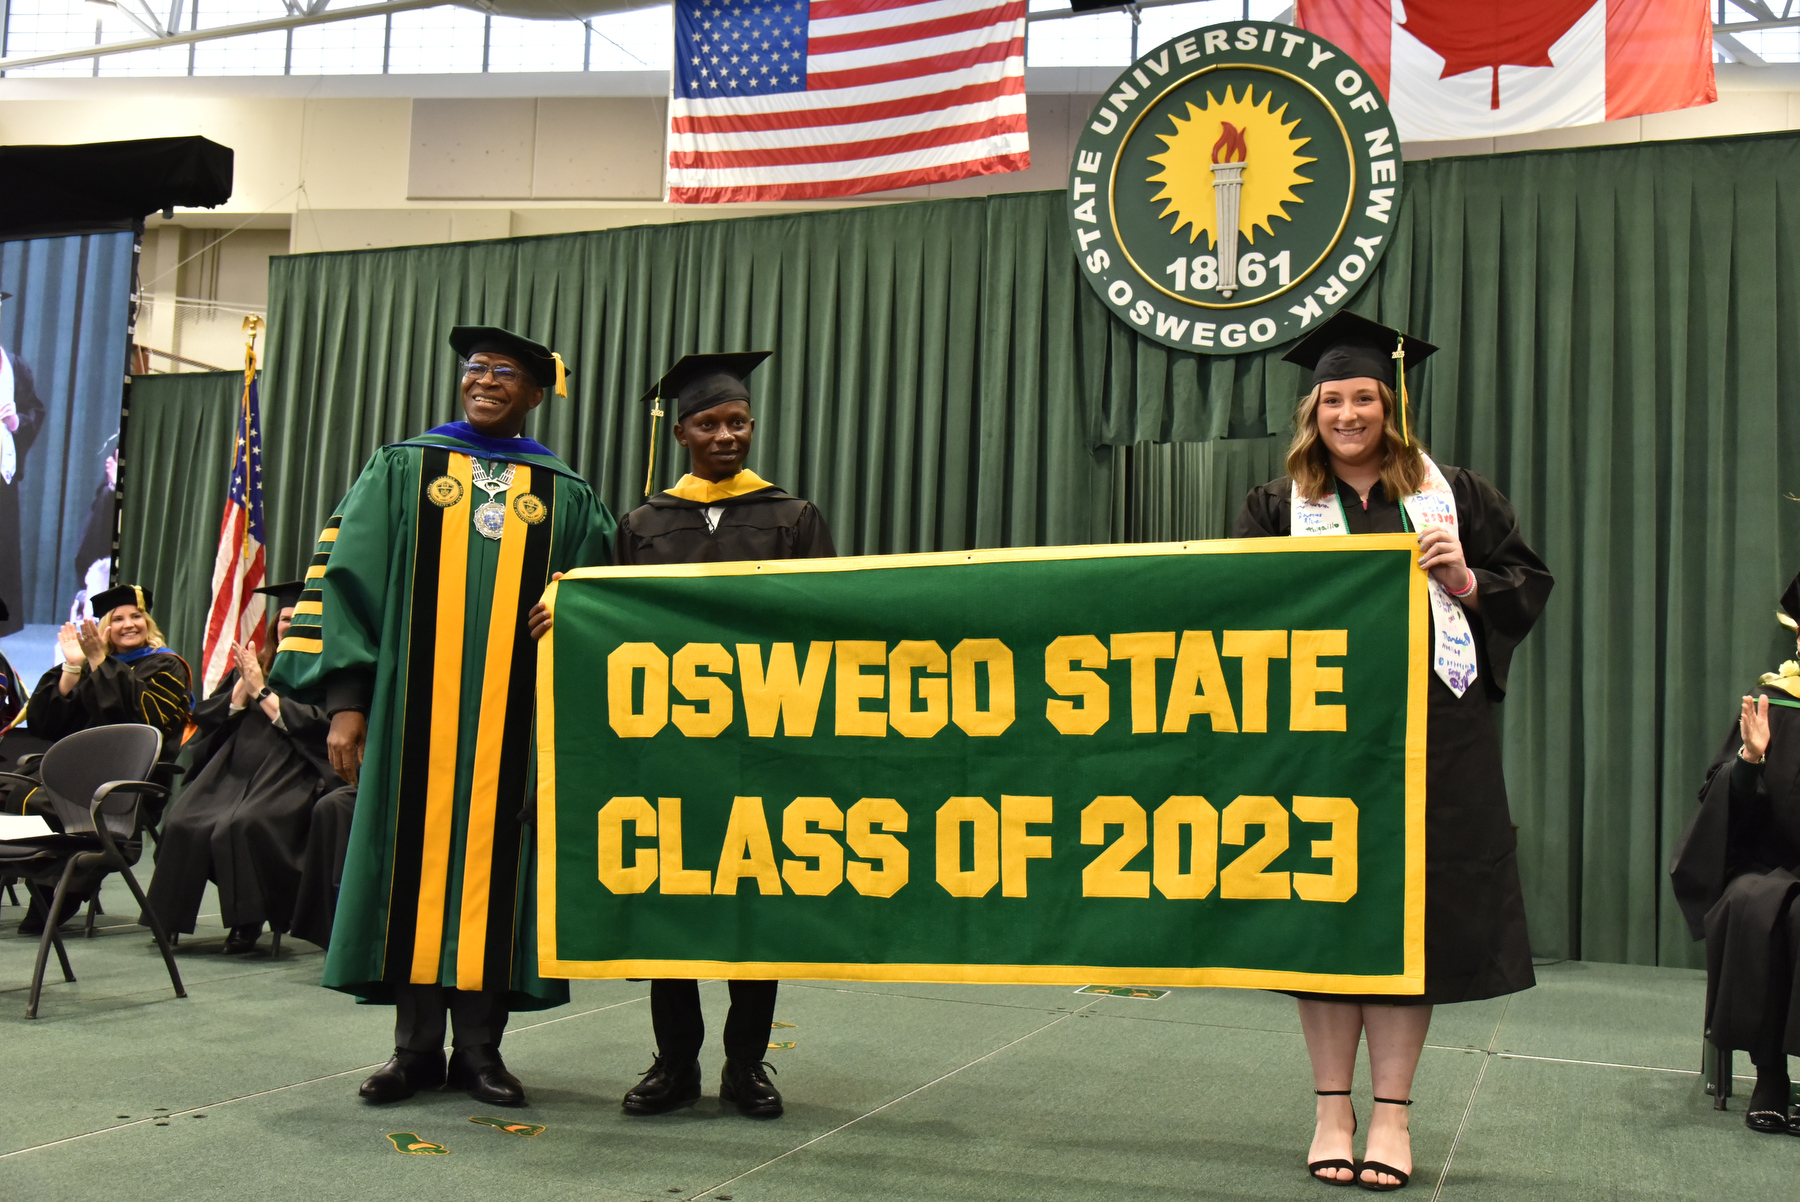 One of the high points at Commencement is the presentation of the alumni banner officially welcoming all of the new graduates into the Oswego Alumni Association. President Peter O. Nwosu stands with Otis Gbala, who earned a master’s in biomedical and health informatics, and Kaleigh Janes, who earned a bachelor’s in electrical and computer engineering, while they display the banner on the platform.